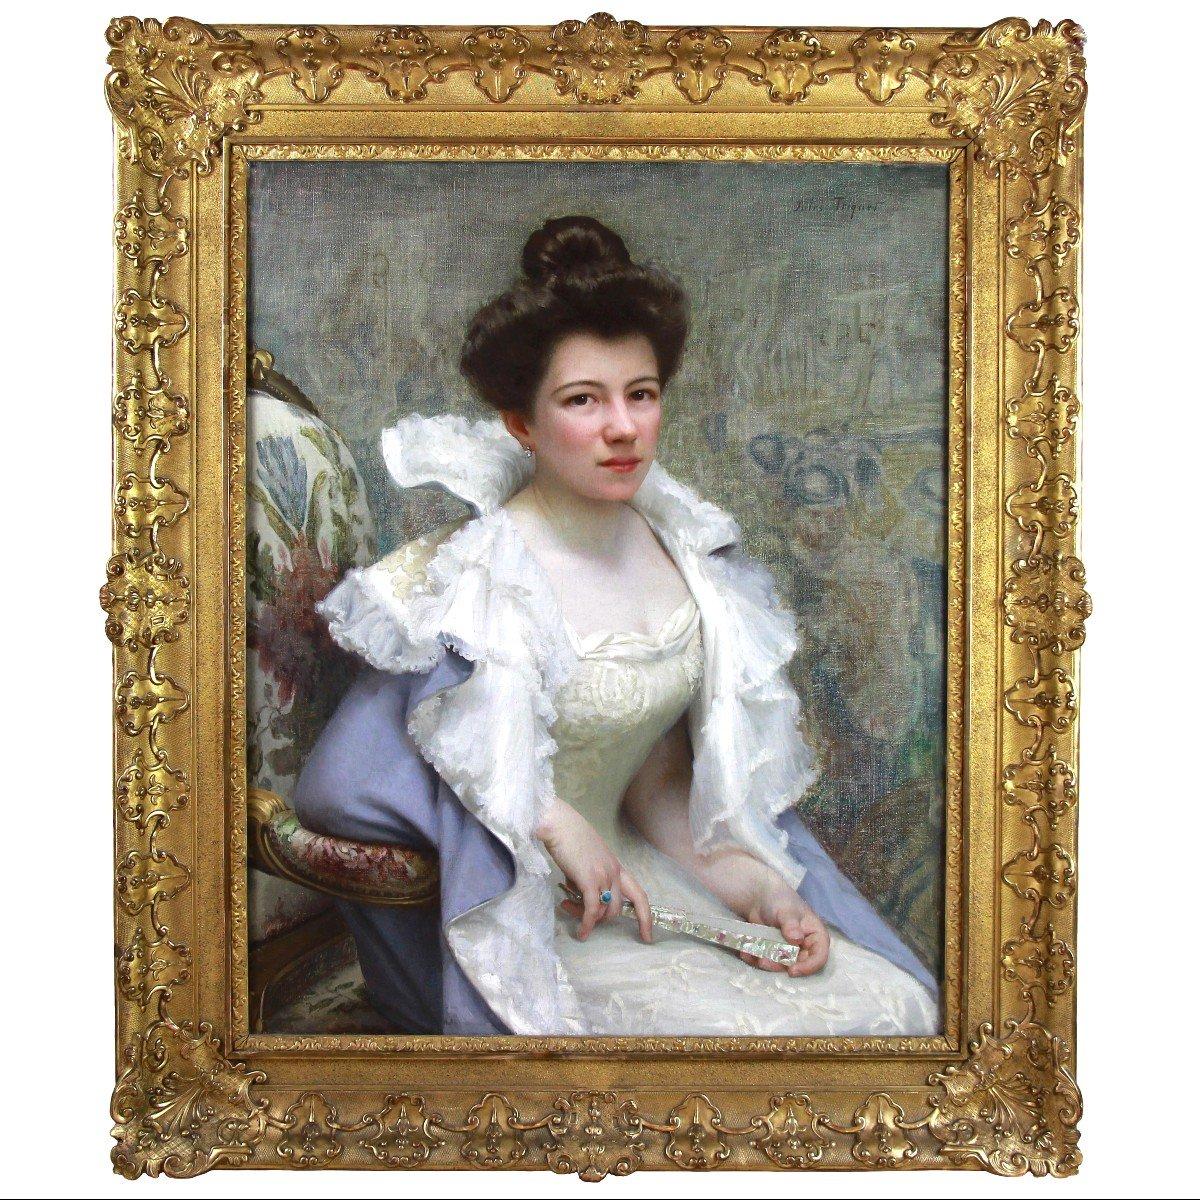 Oil on canvas "jeune femme à l'éventail" by Jules Triquet

Sublime portrait of a woman with a fan at the end of the 19th century, painted by the French painter Jules Octave Triquet
Very high finisching quality, with an exceptionally beautiful Louis